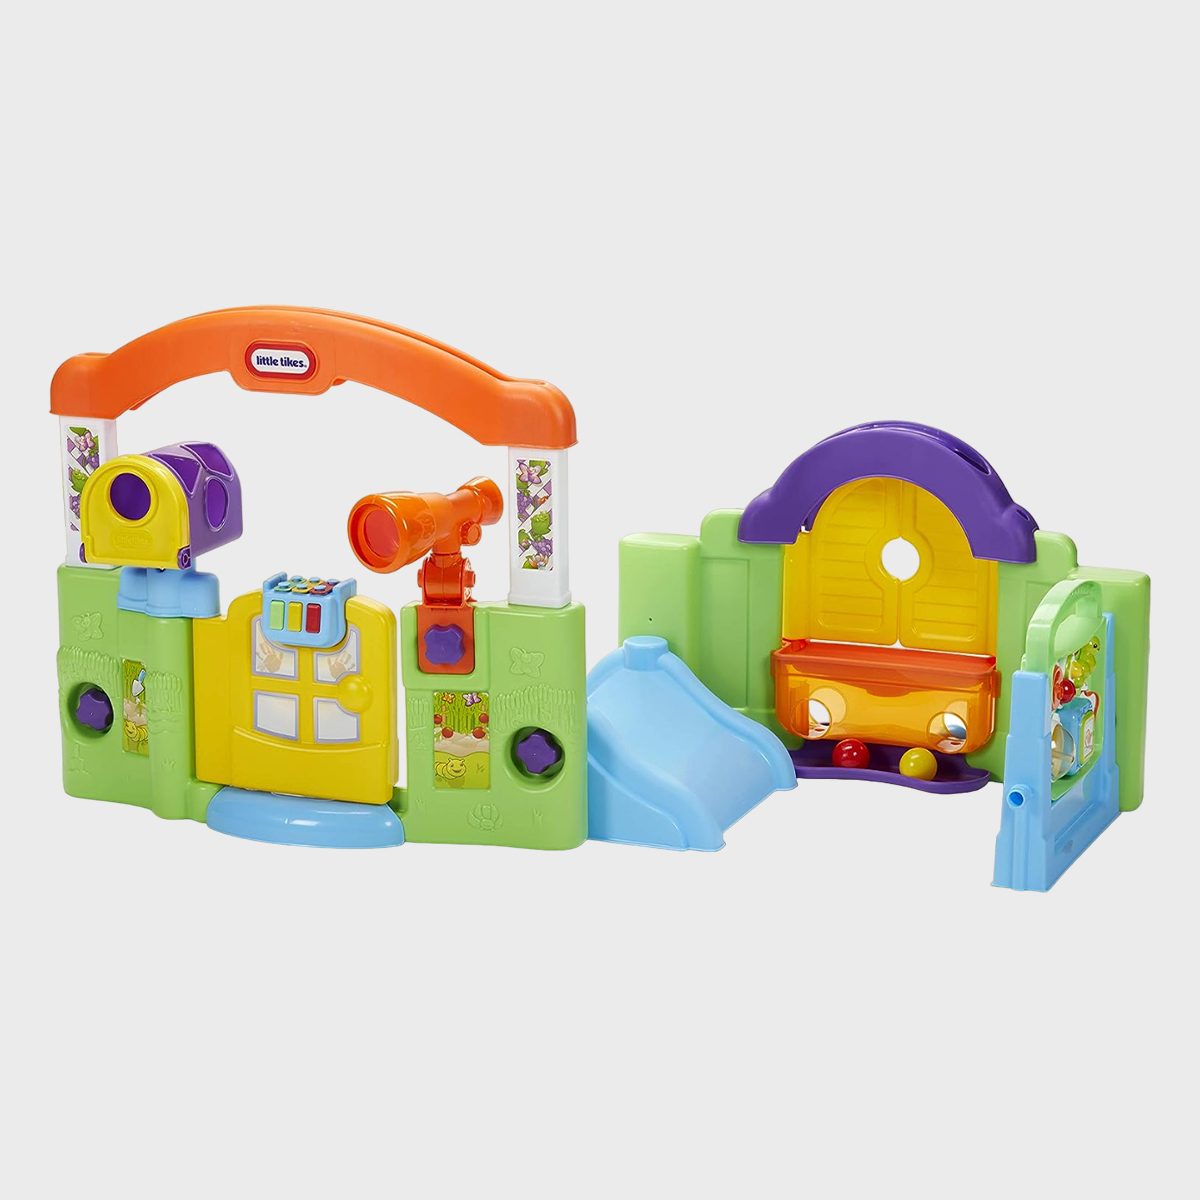 <p>With <a href="https://www.rd.com/list/gifts-for-kids/">four kids</a>, we've gone through <em>a lot</em> of toys over the years, but this <a href="https://www.amazon.com/Little-Tikes-Activity-Garden-Playset/dp/B00C2P6VWW" rel="noopener noreferrer">activity center</a> is one of the few that has been a hit with all of them. Set it up as a closed play center or an open, two-sided play center for hours of fun with a ball drop, shape sorting mailbox, door and window shutters that open and close, a miniature slide, and more. Changing the configuration is simple, so they'll never get bored.</p> <p class="listicle-page__cta-button-shop"><a class="shop-btn" href="https://www.amazon.com/Little-Tikes-Activity-Garden-Playset/dp/B00C2P6VWW">Shop Now</a></p>